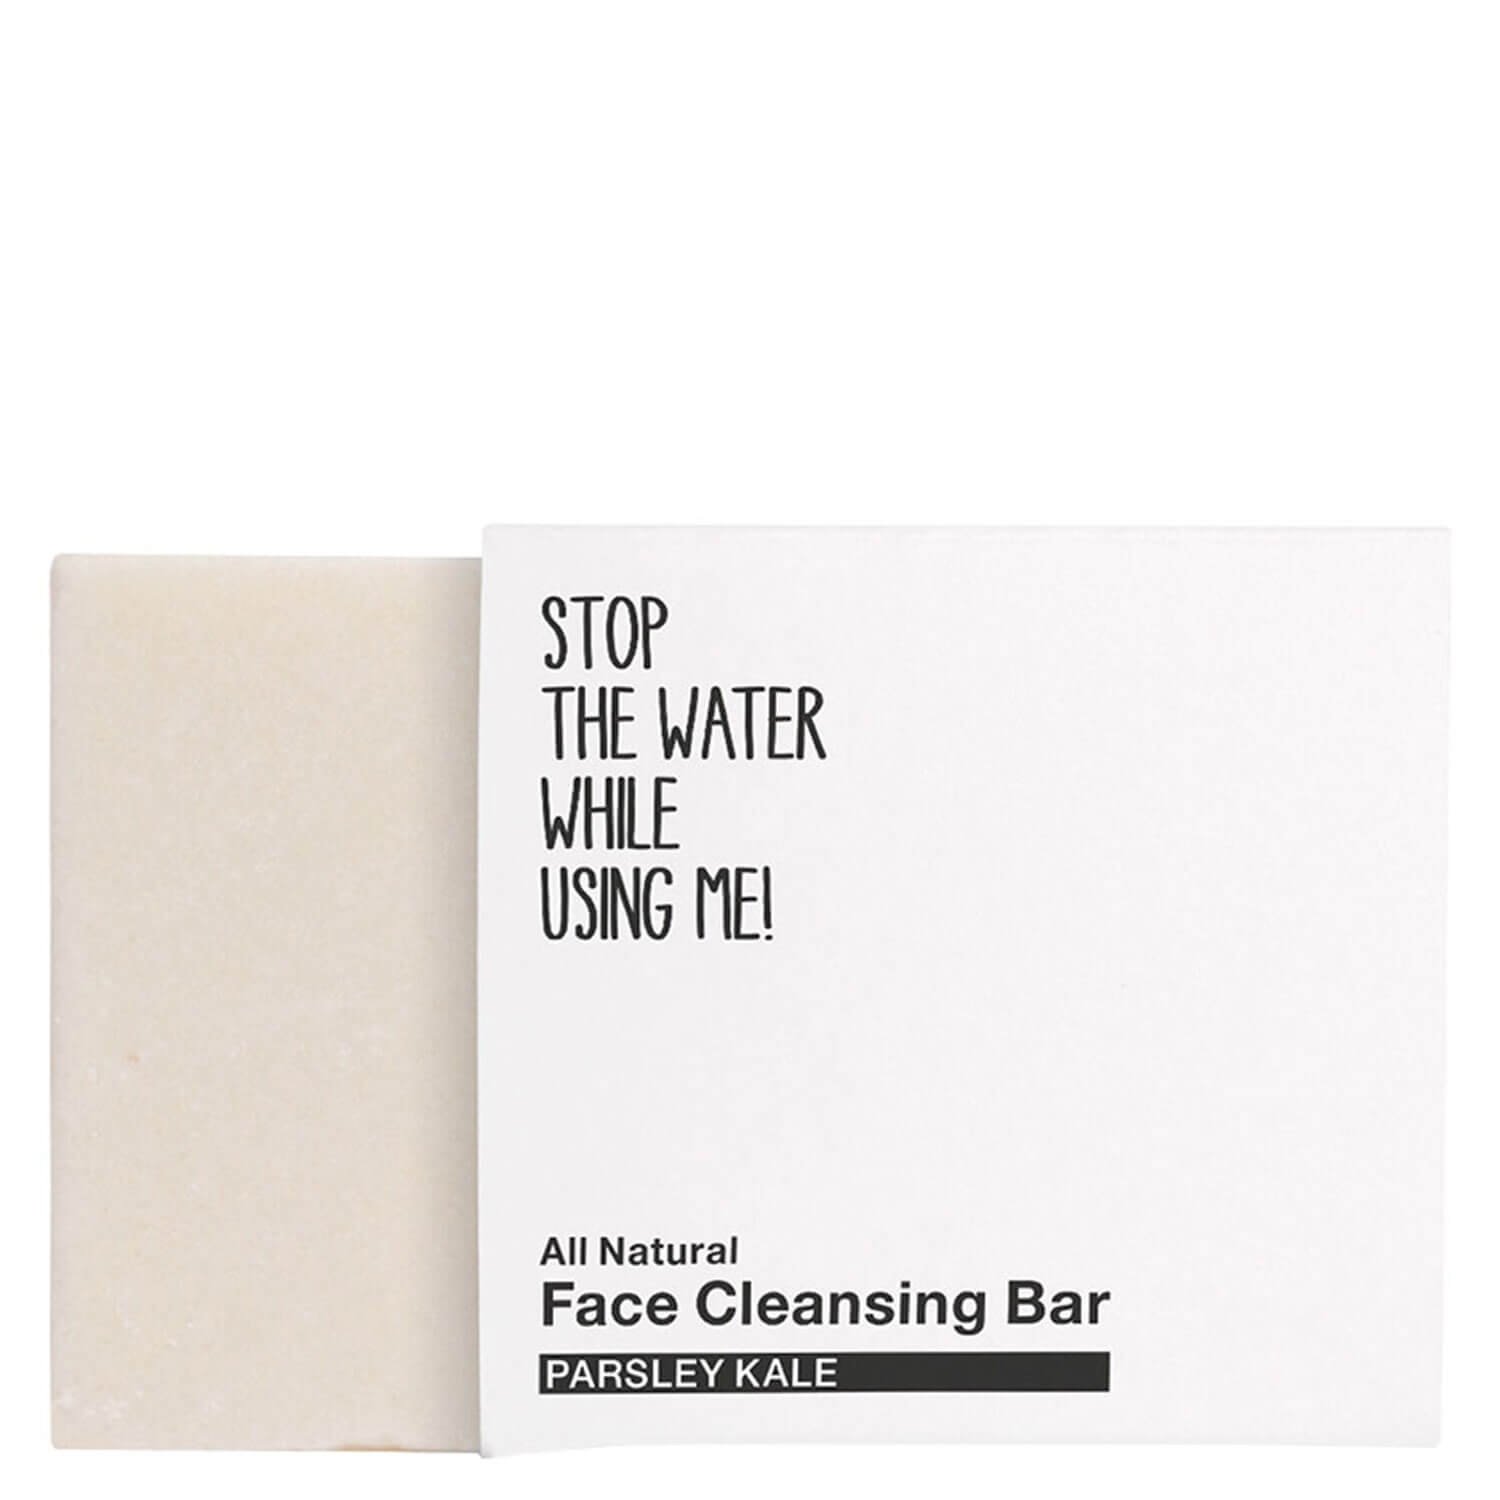 Product image from All Natural Face - Face Cleansing Bar Parsley Kale